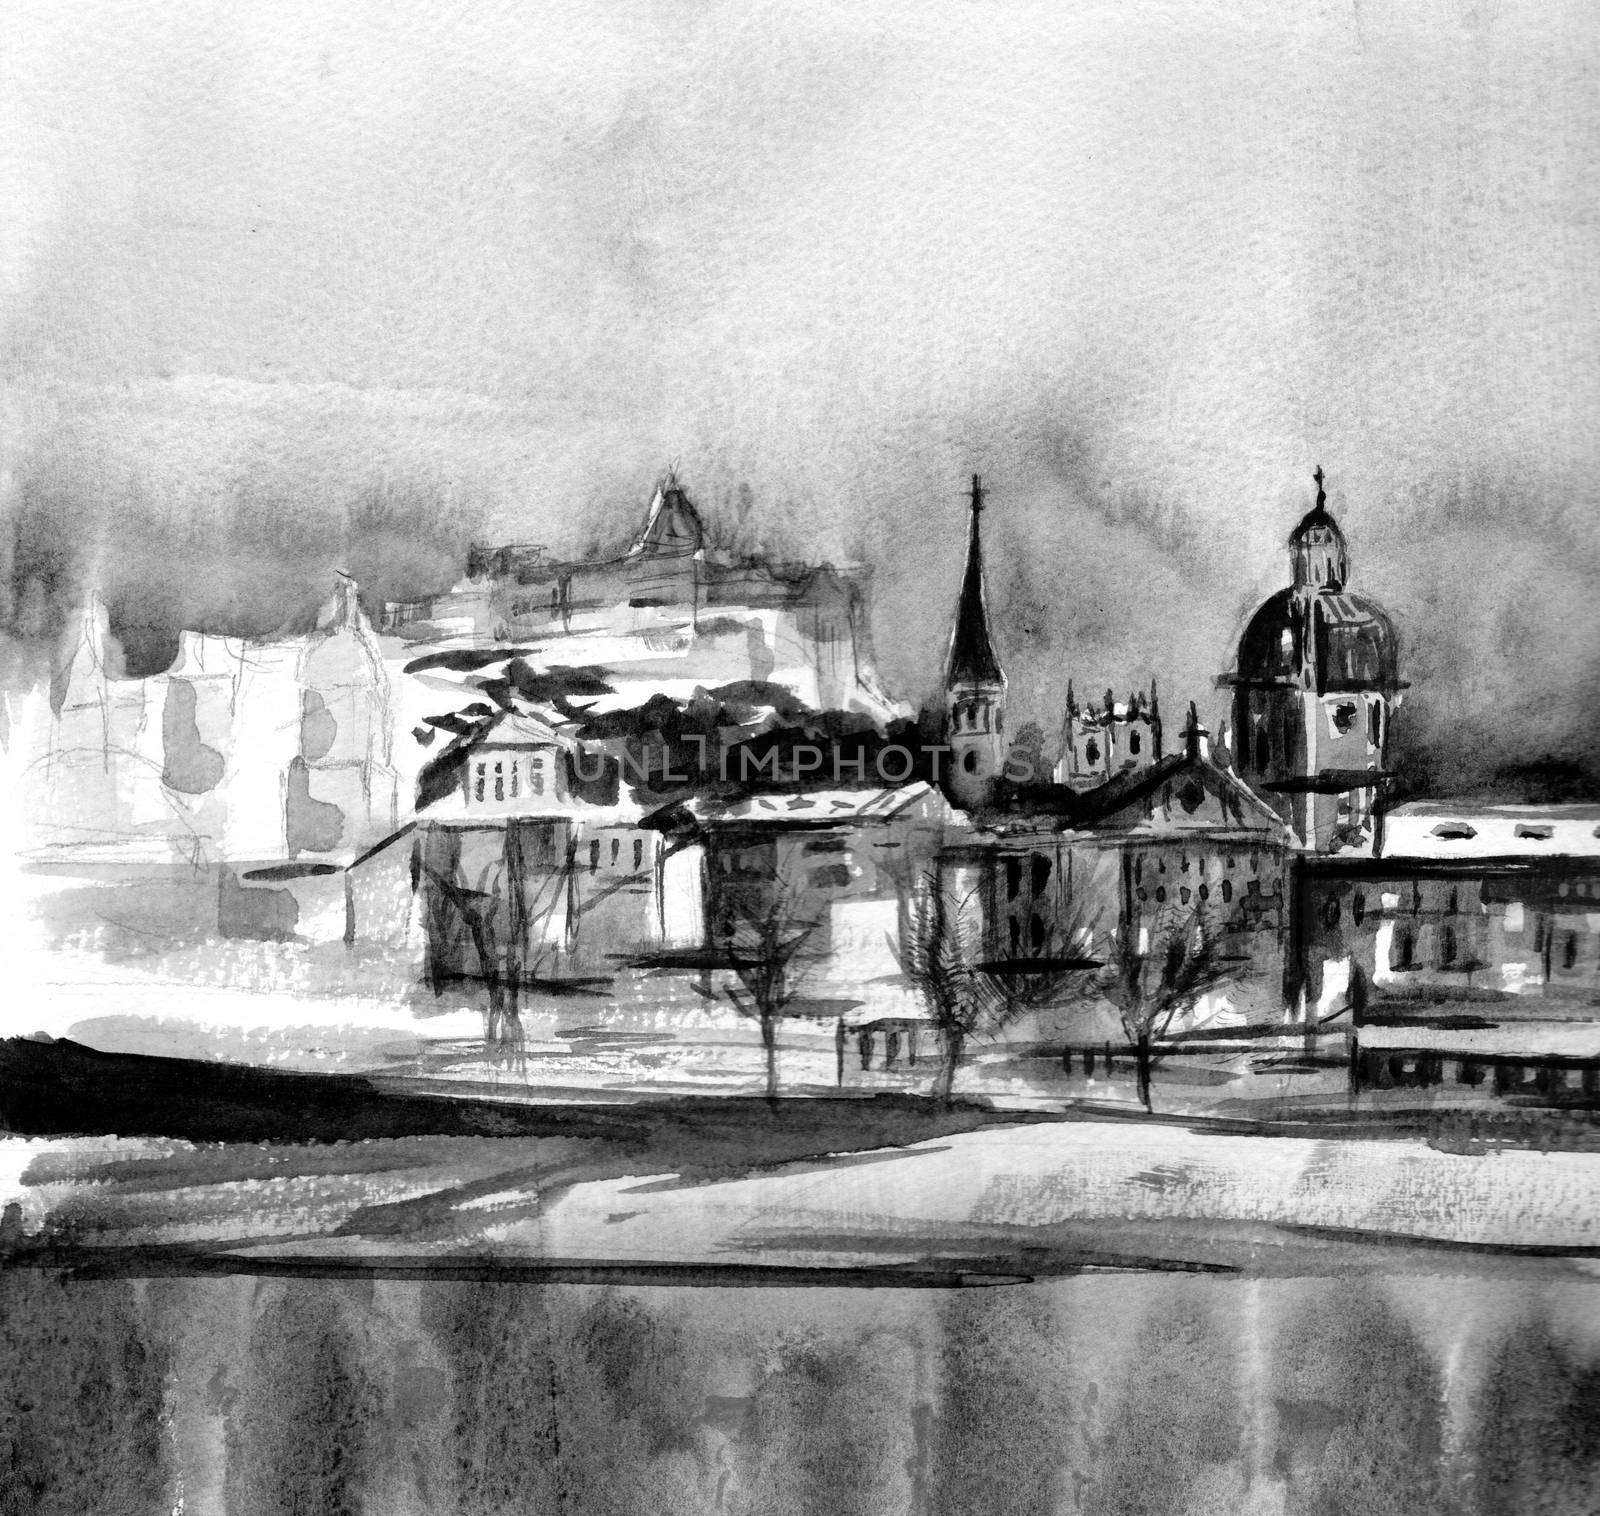 Scenic panorama of the Old Town (Gamla Stan) in Stockholm, Sweden. Hand-drawn illustration. Watercolor art. Grey, black and white colors. Monochrome old card.